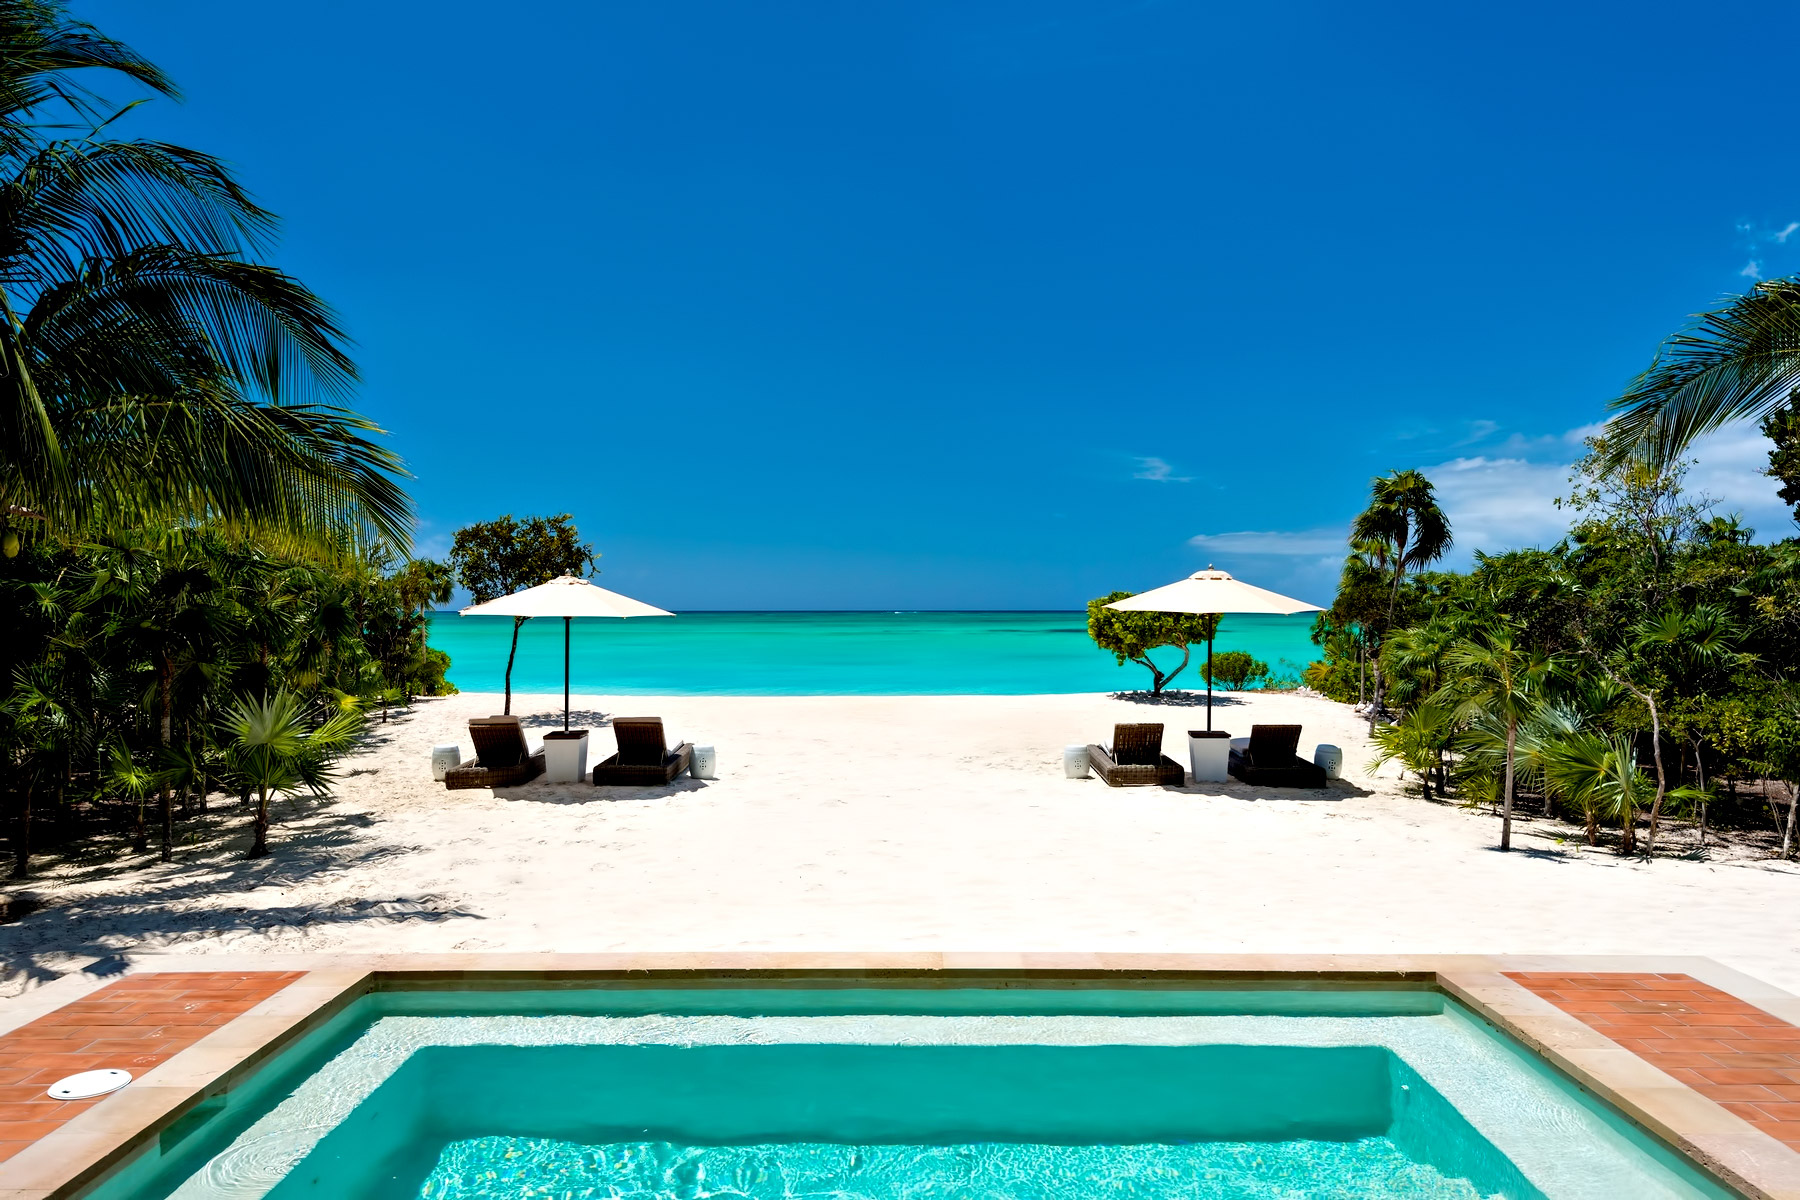 Oliver’s Cove Luxury Estate – Parrot Cay, Turks and Caicos Islands